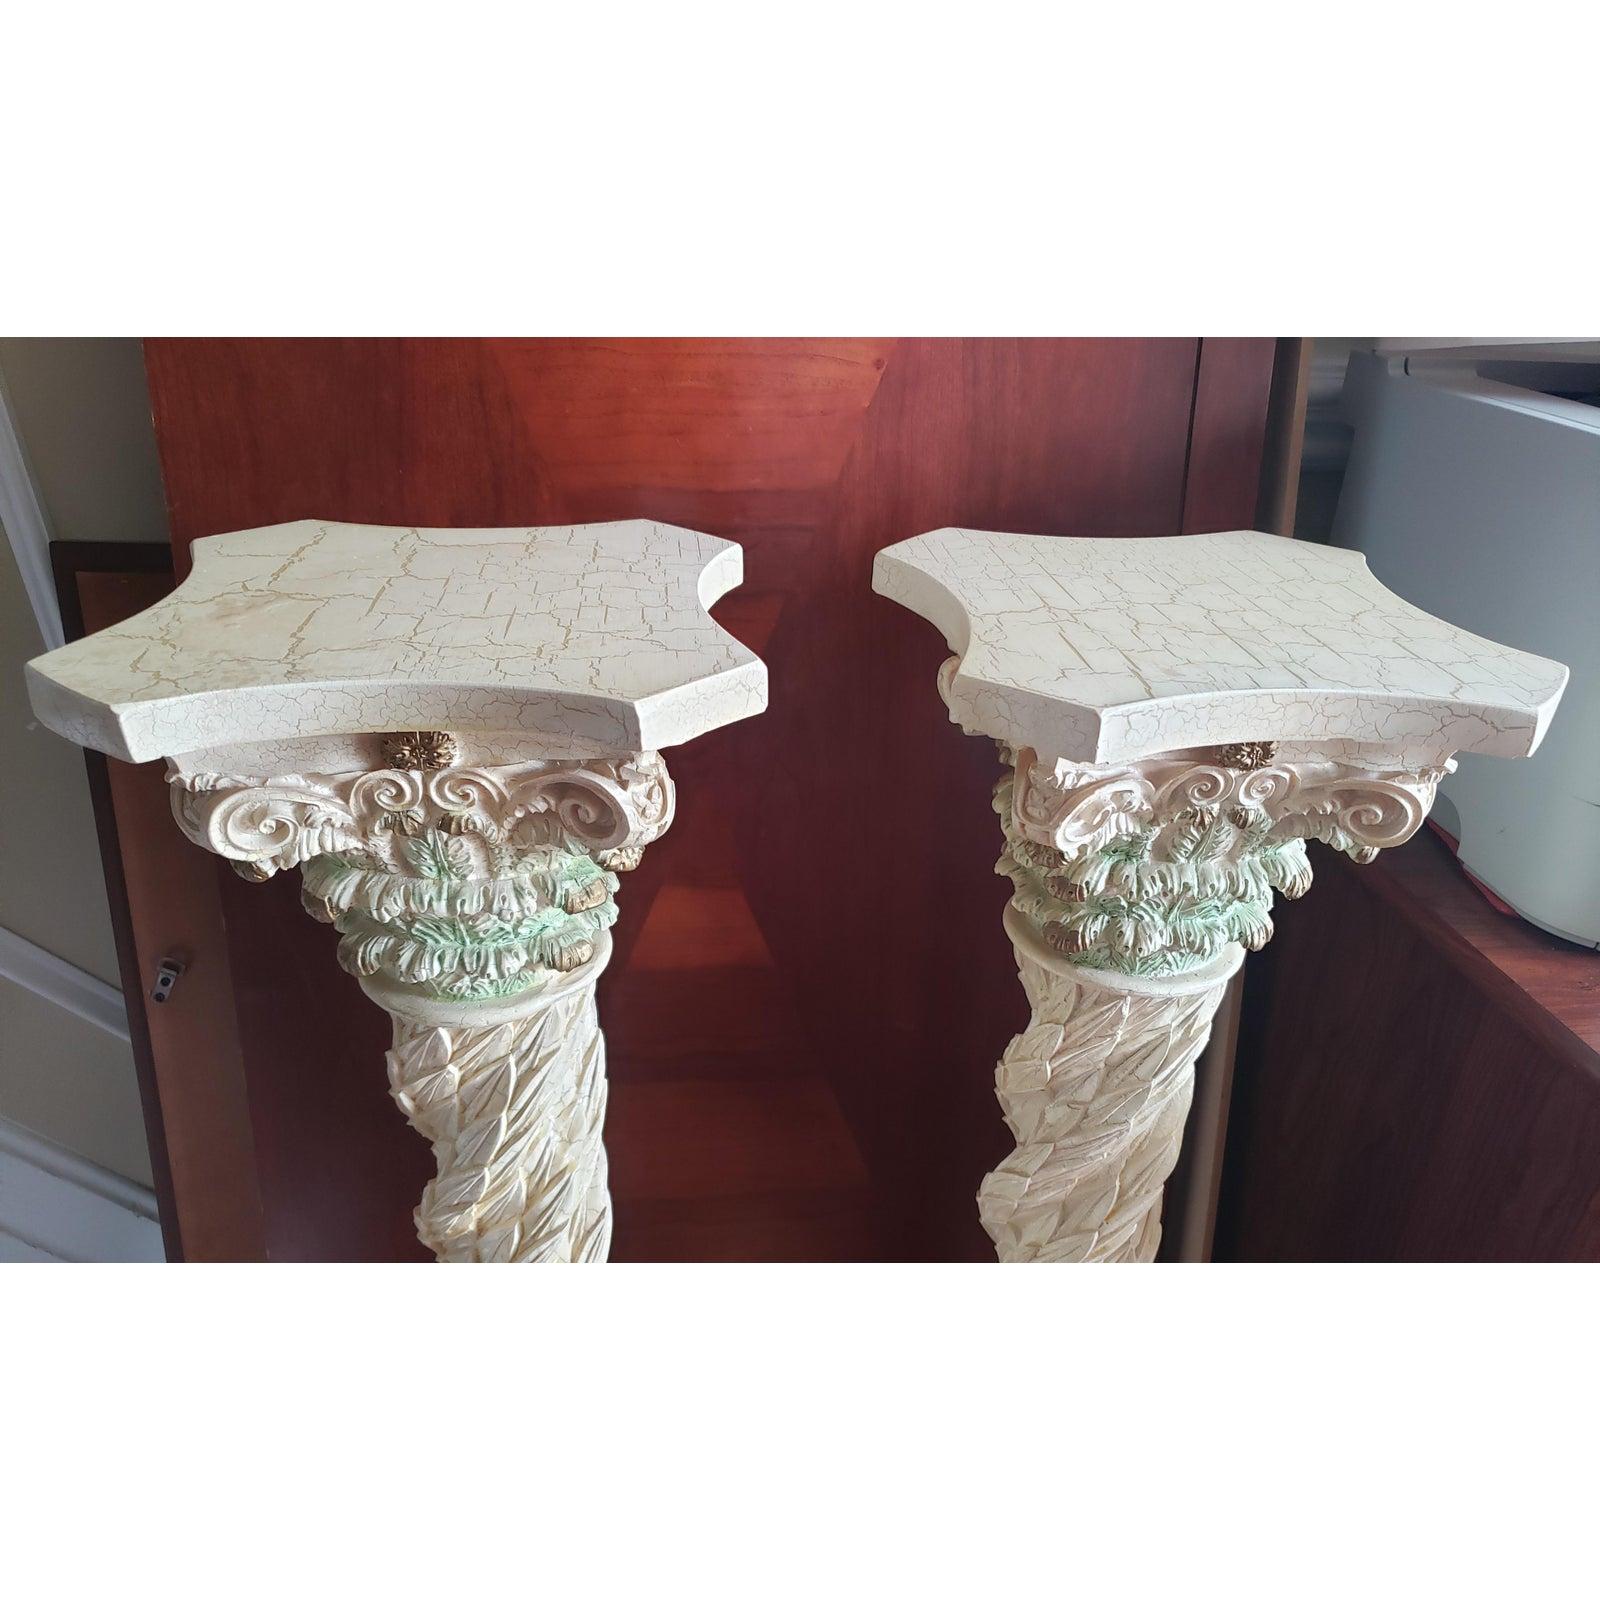  1990s Carved Corinthian Resin Pedestal  For Sale 1